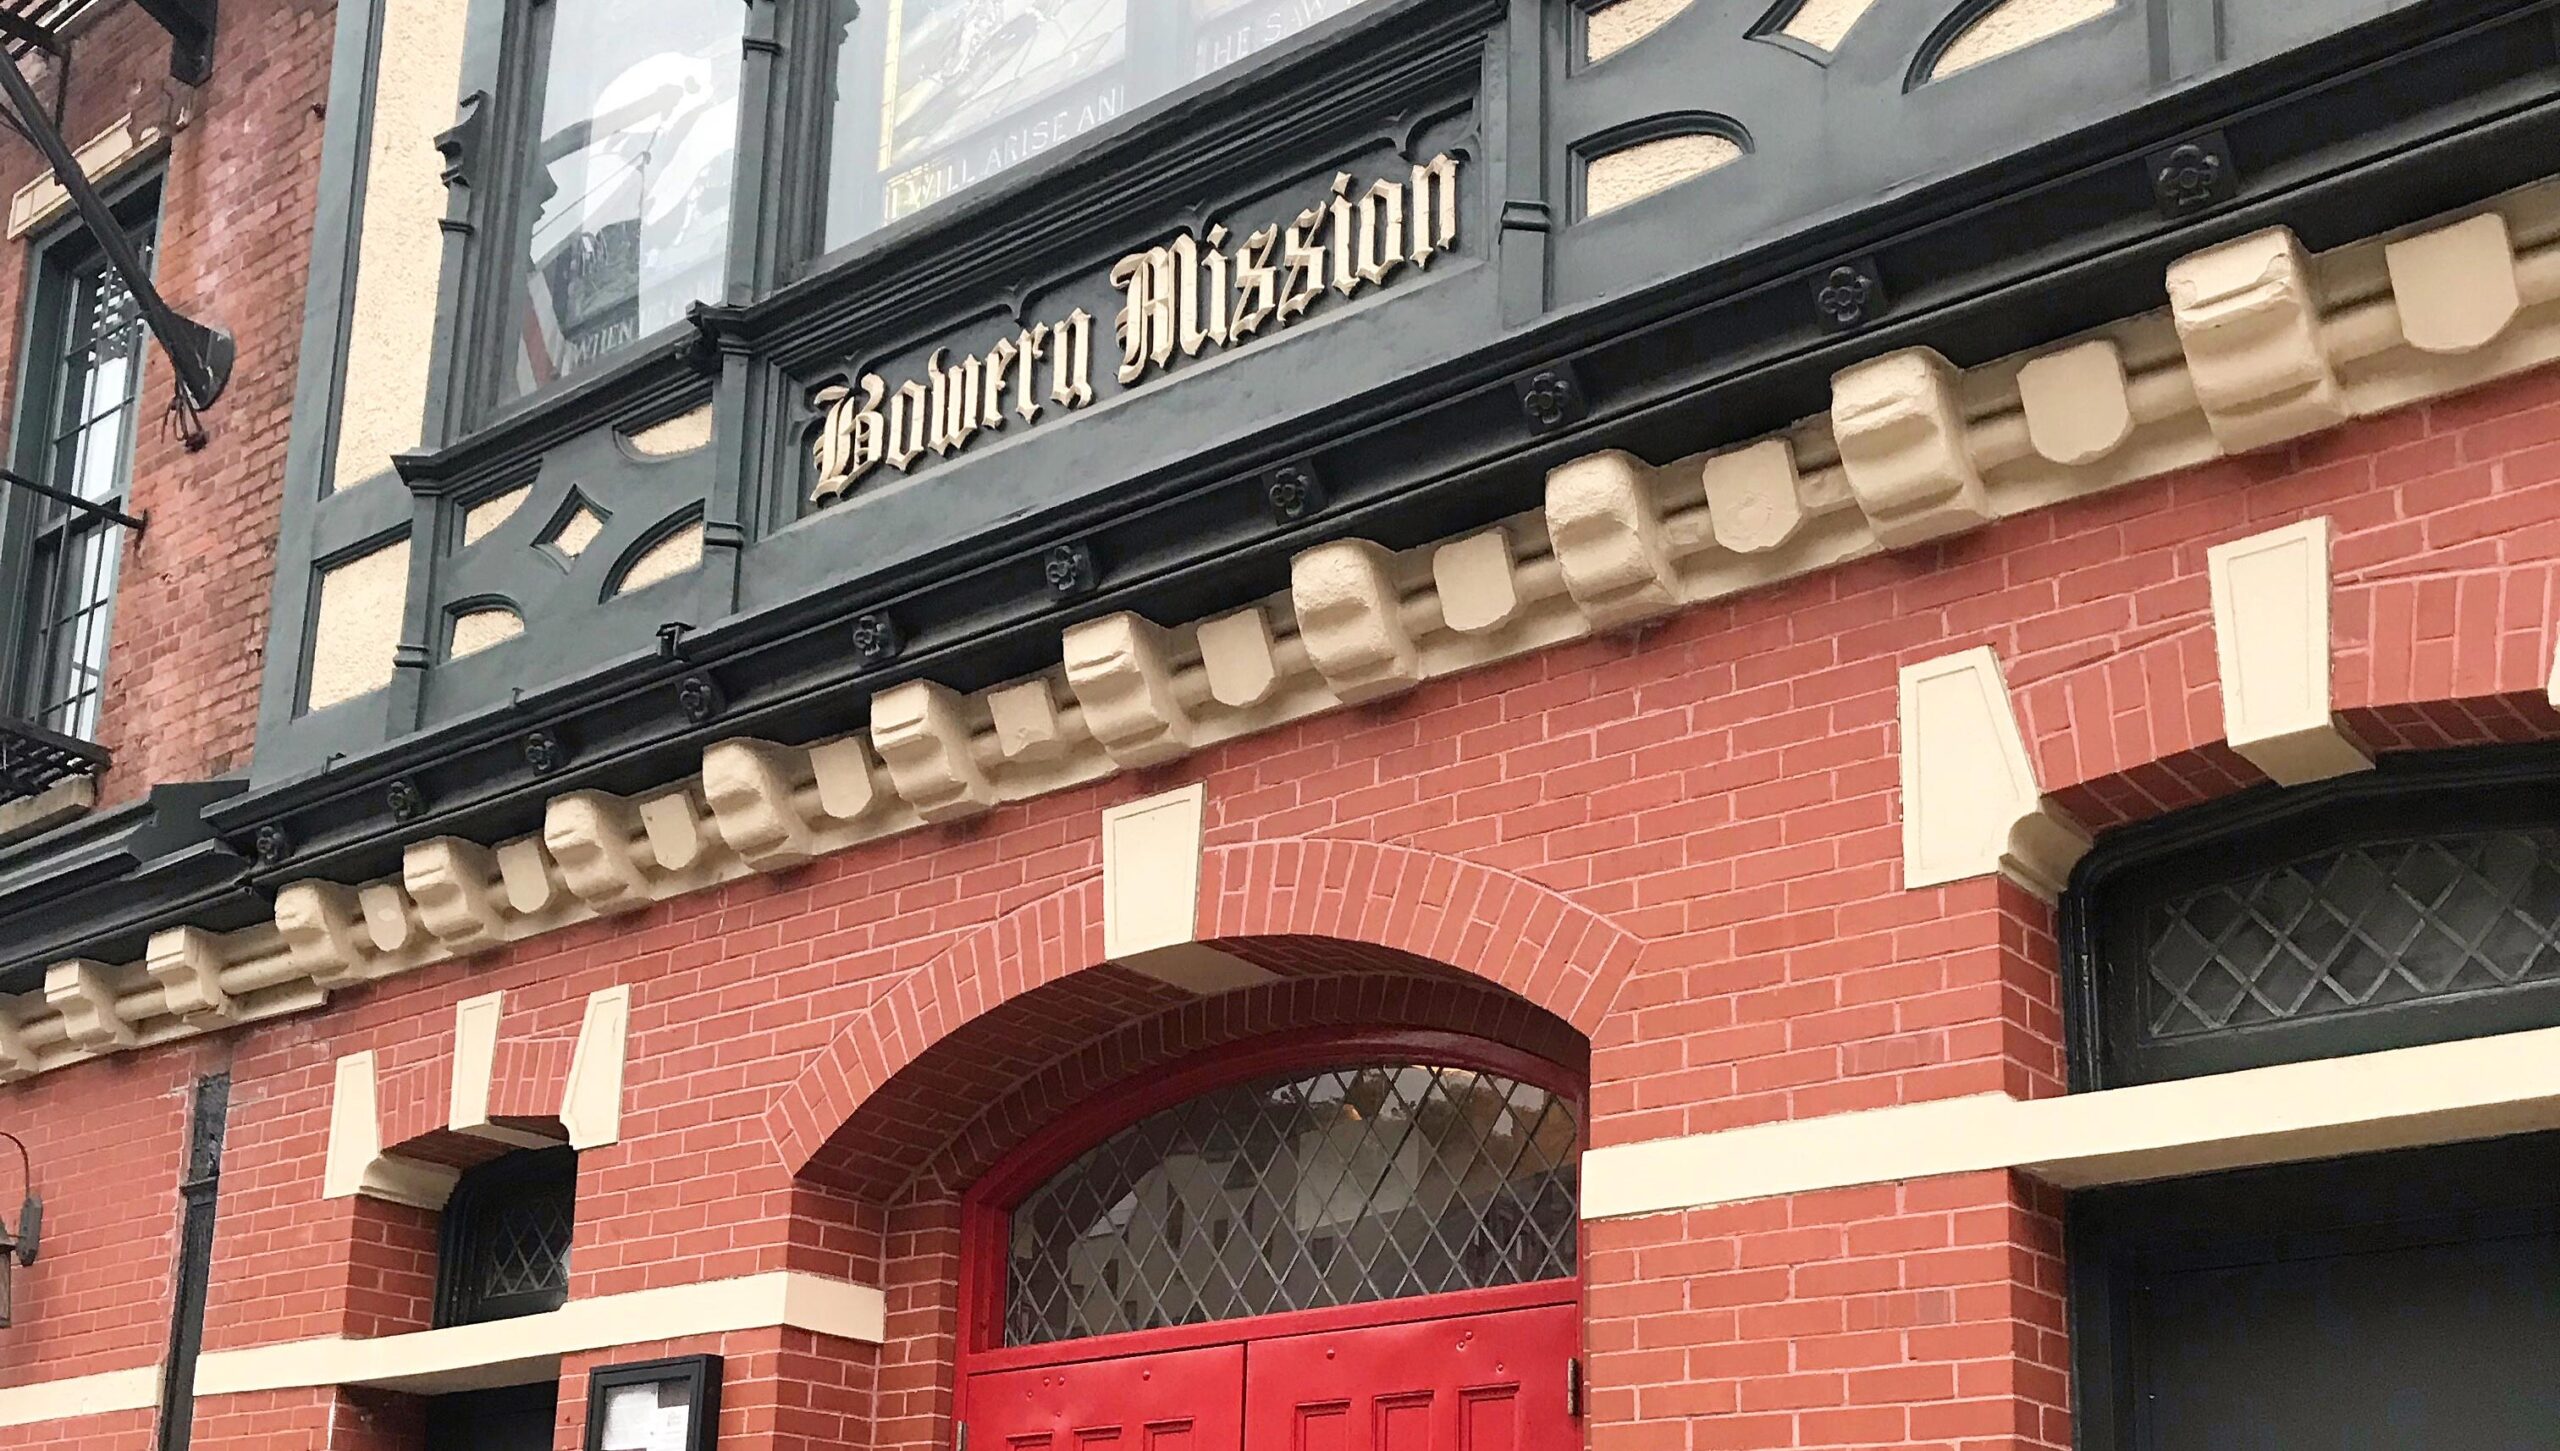 The entrance of The Bowery Mission.